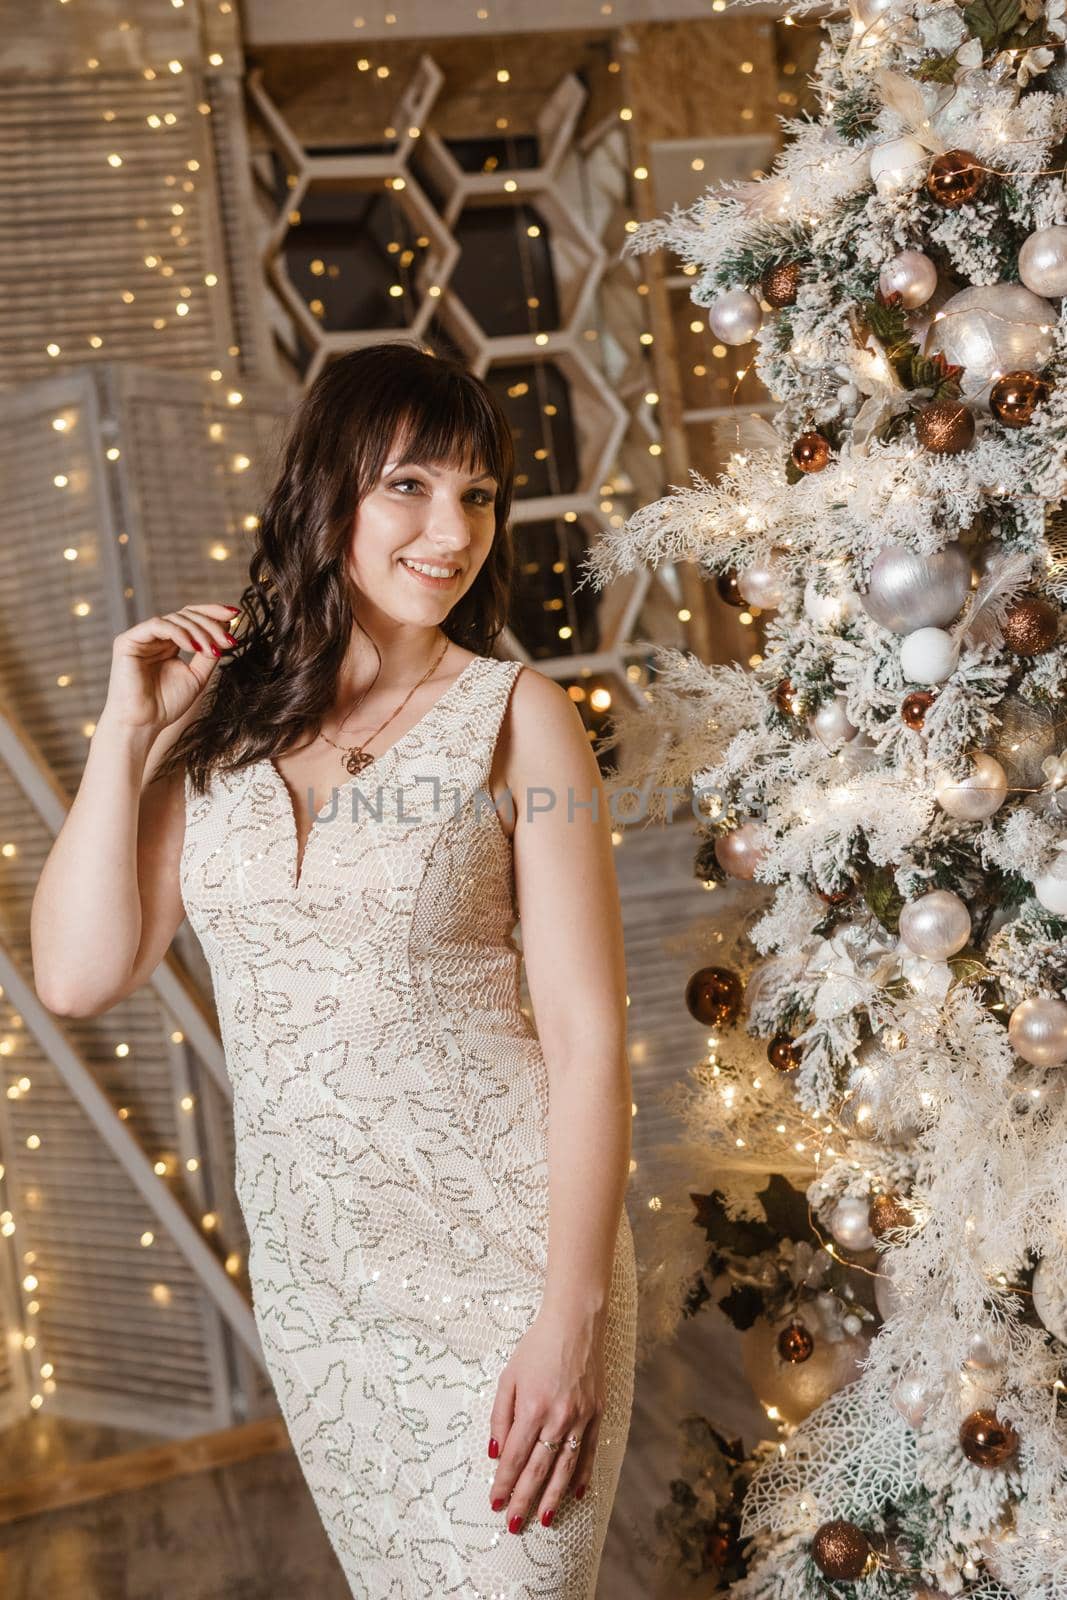 A brunette woman in a beautiful light tight dress next to a Christmas tree. The magical atmosphere of Christmas Eve on December 25. Decoration for the holiday in a light style with lots of lights and light bulbs.